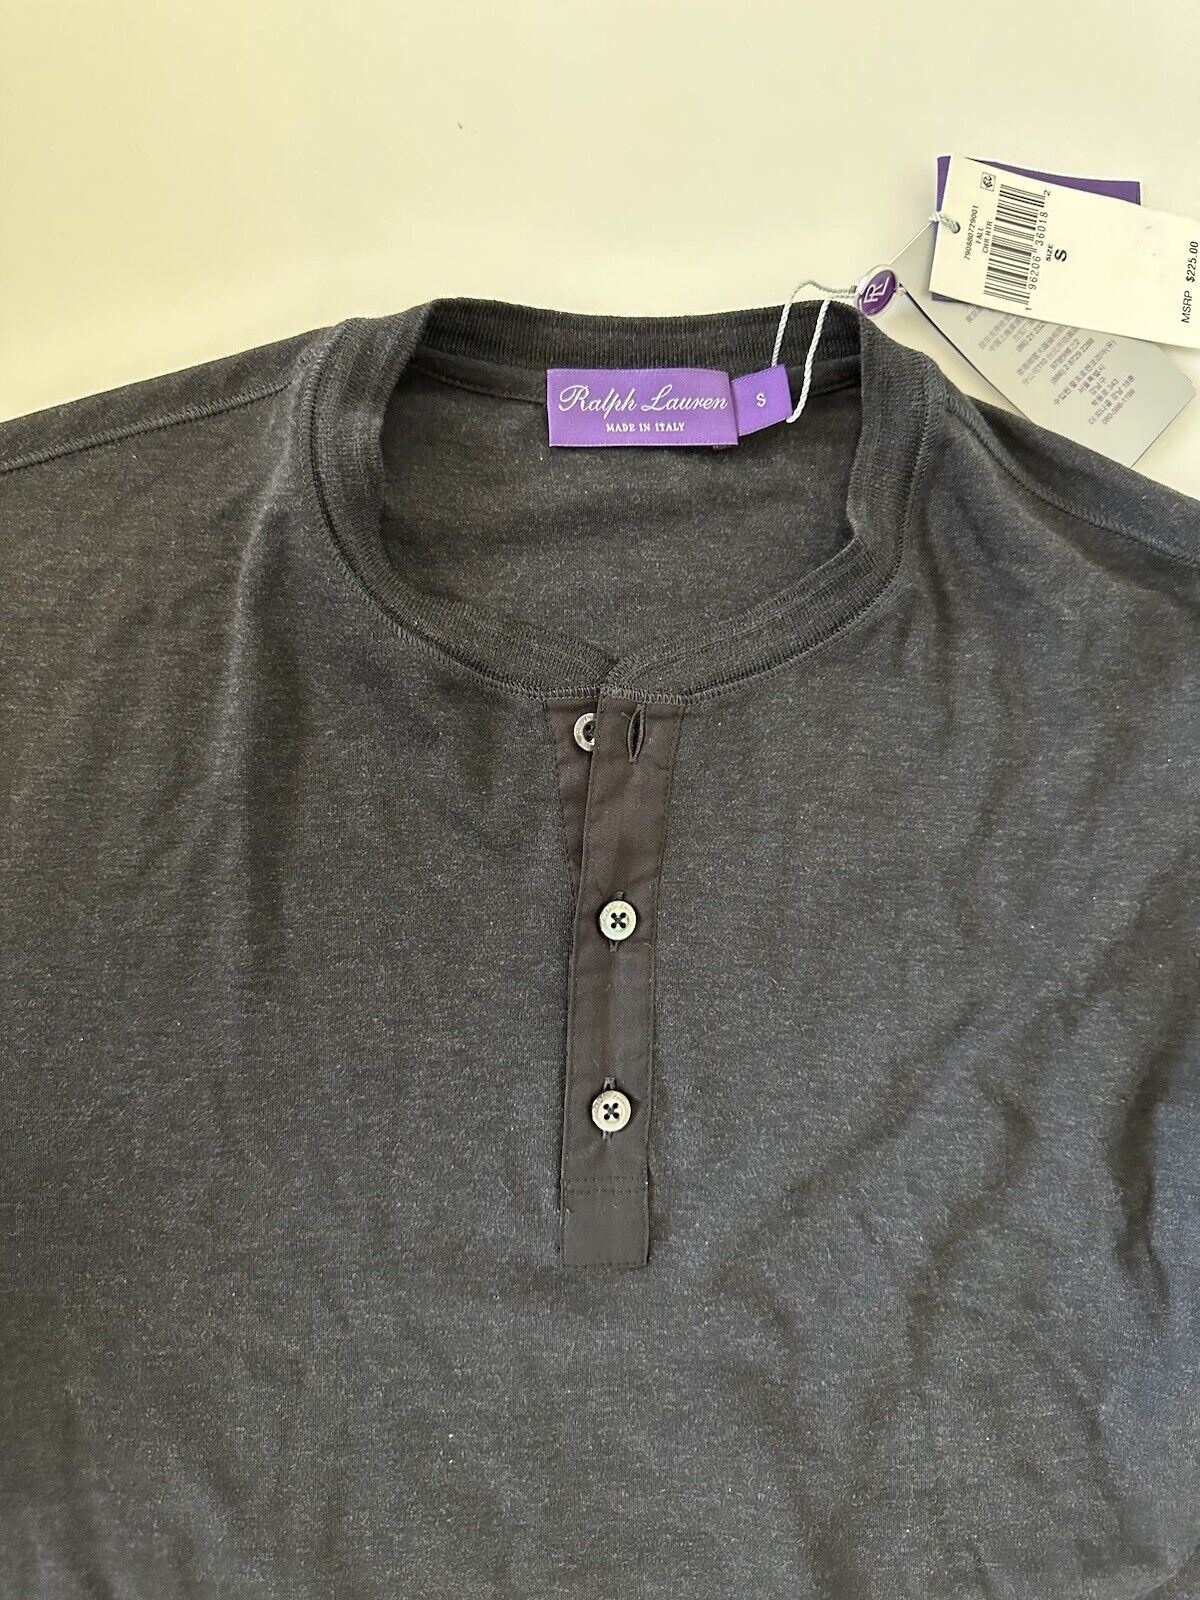 NWT $225 Ralph Lauren Purple Label Grey Long Sleeve T-Shirt Small Made in Italy